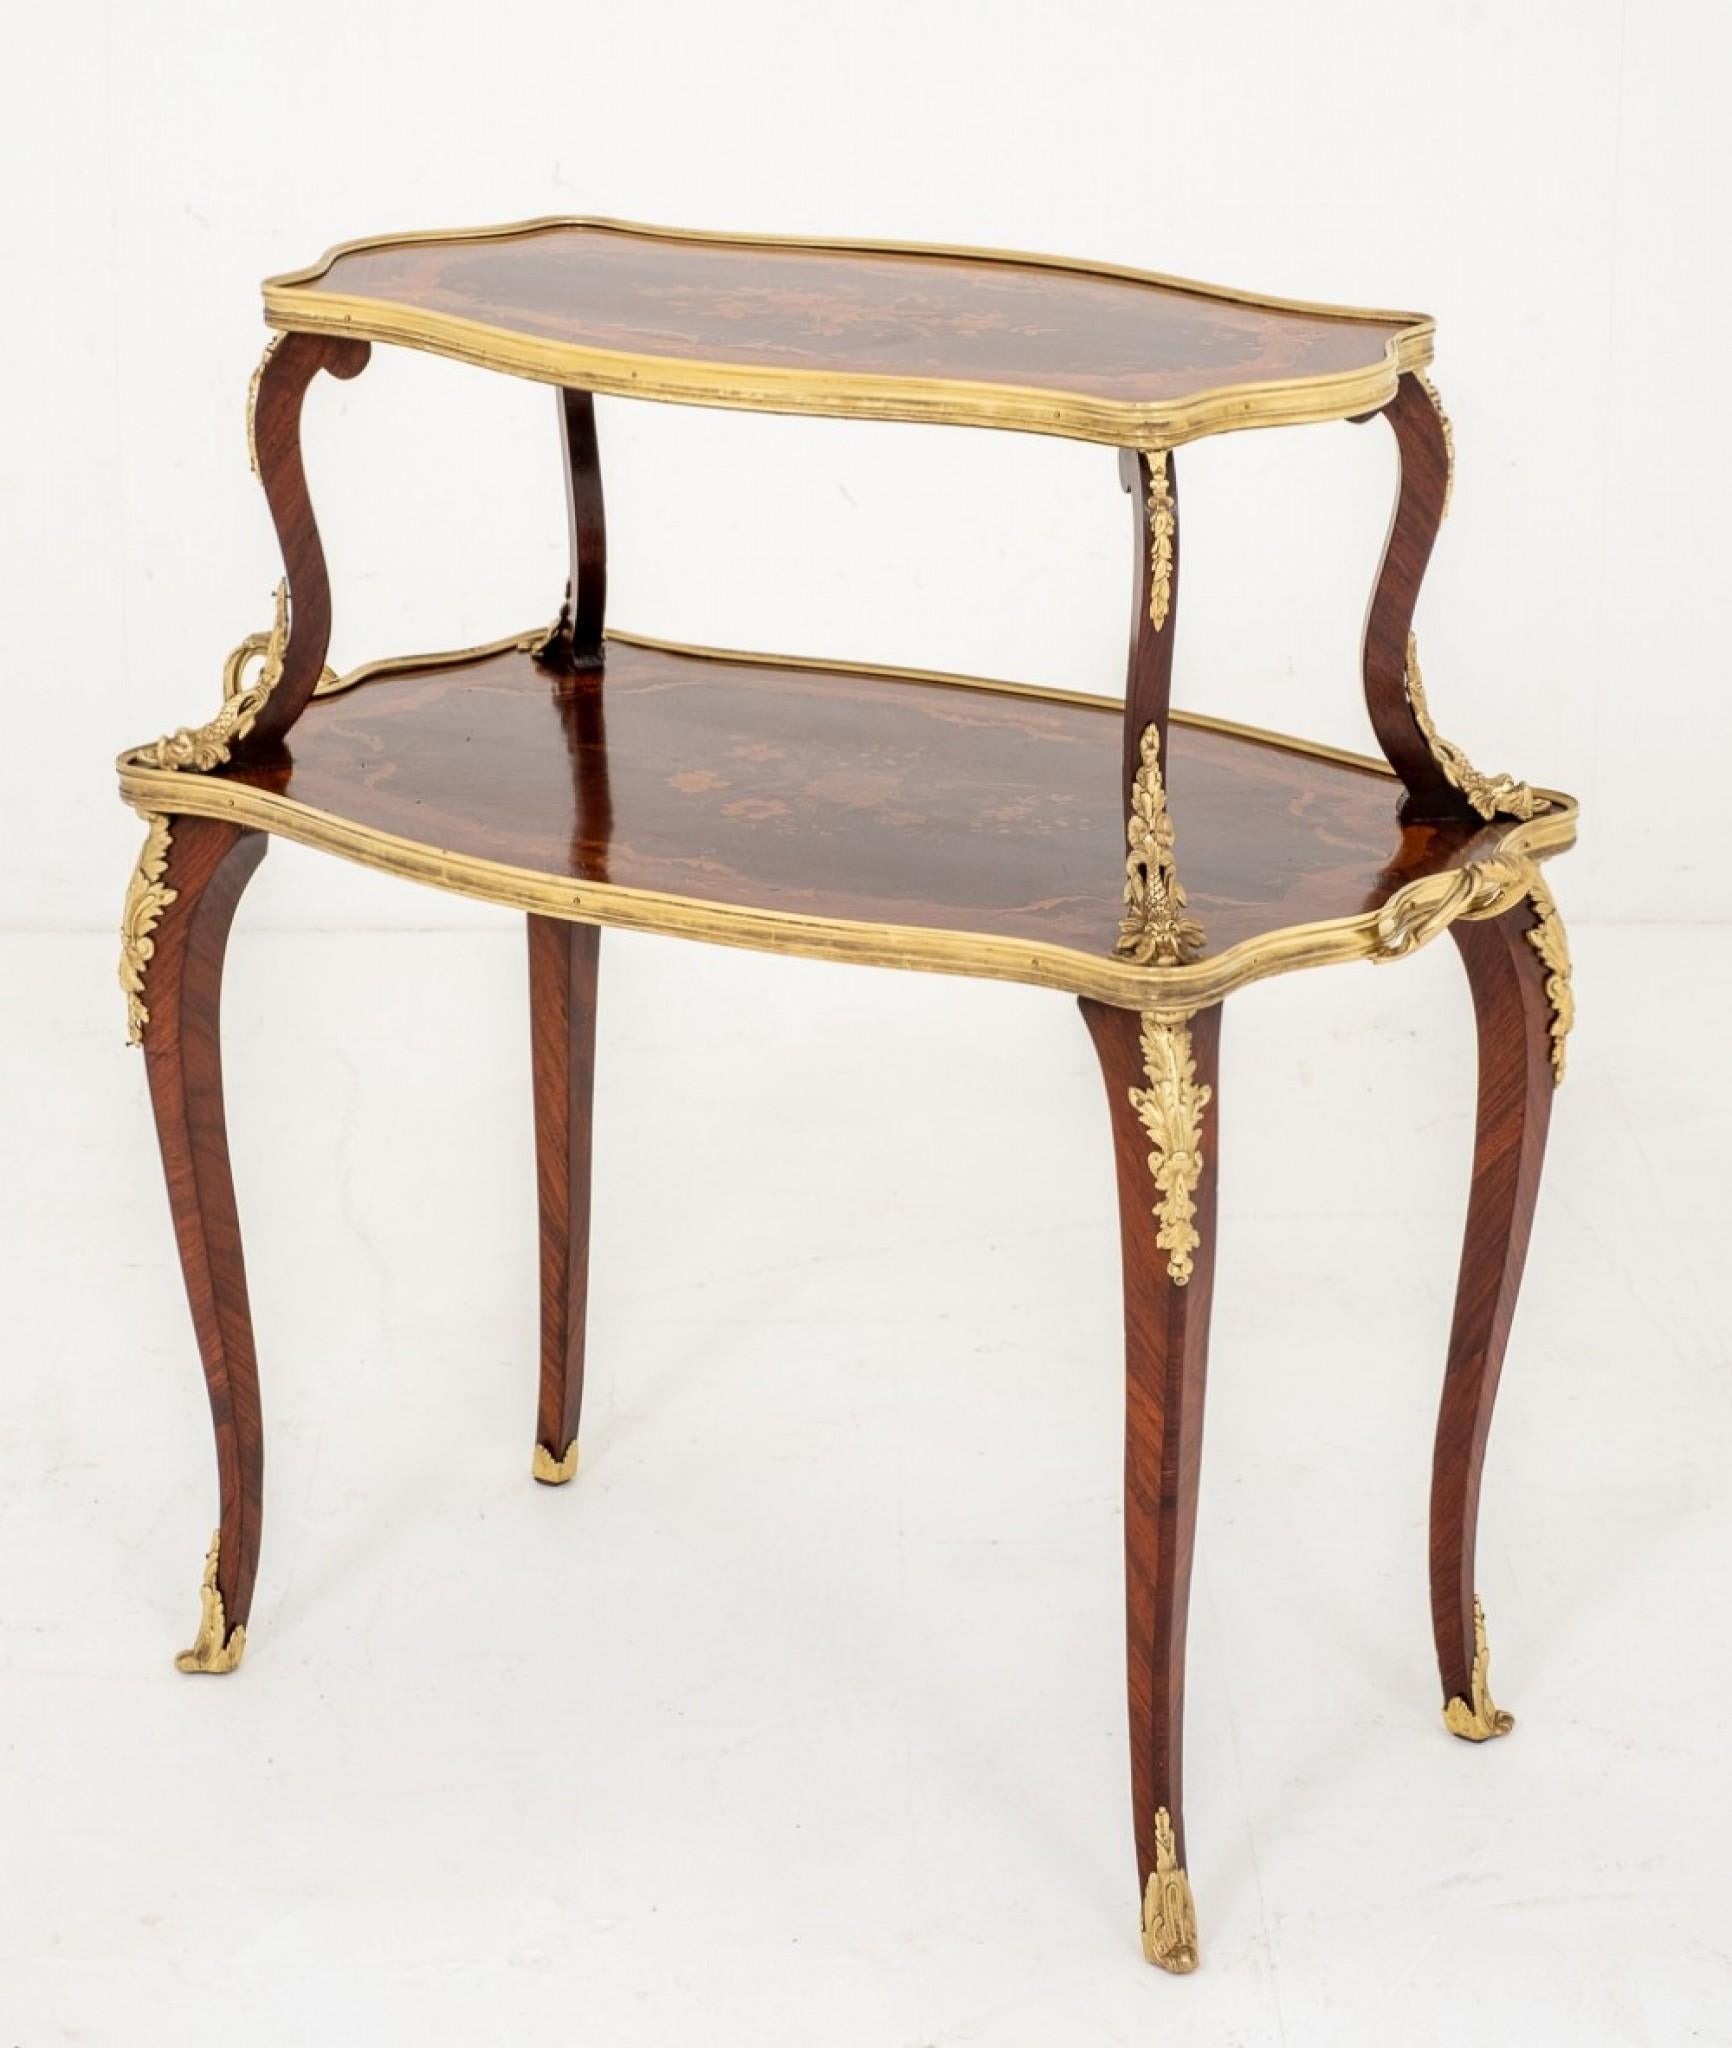 French Etagere Tiered Table, Antique Pastry Table, circa 1900 For Sale 5